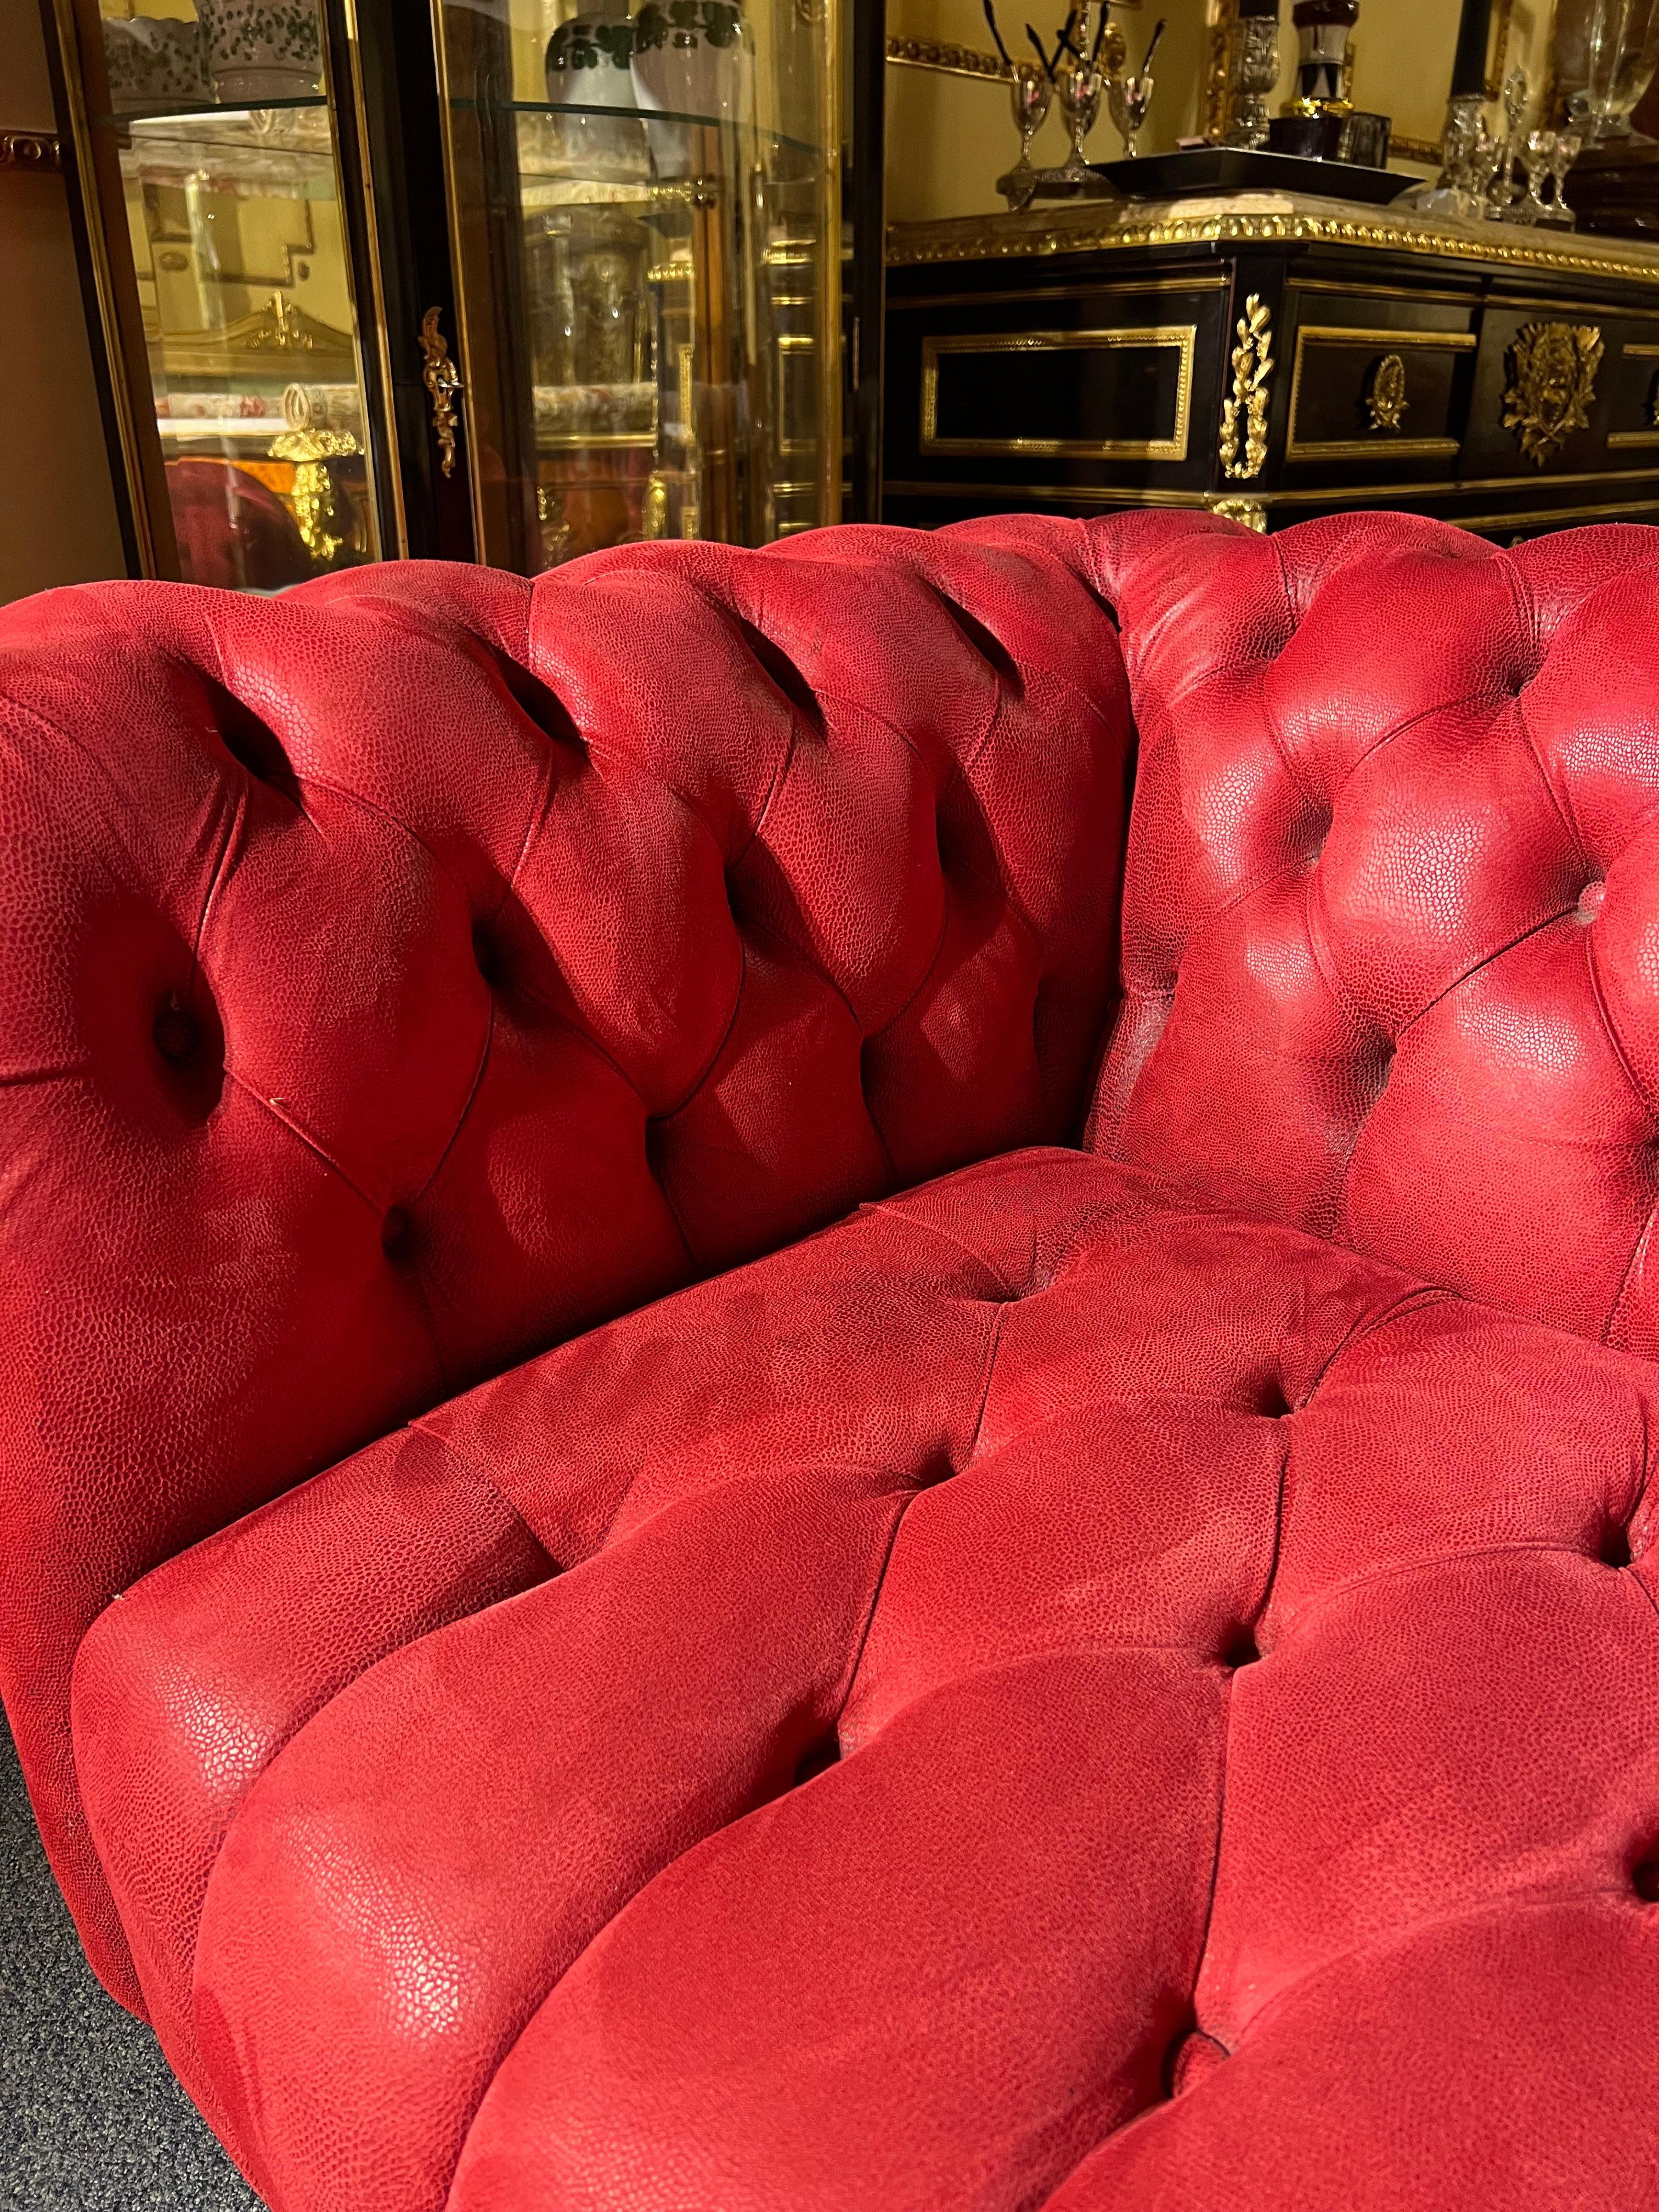 Sofa / Couch Chesterfield Luxury Baroque Style Design Velvet Red Alcantara Look For Sale 7